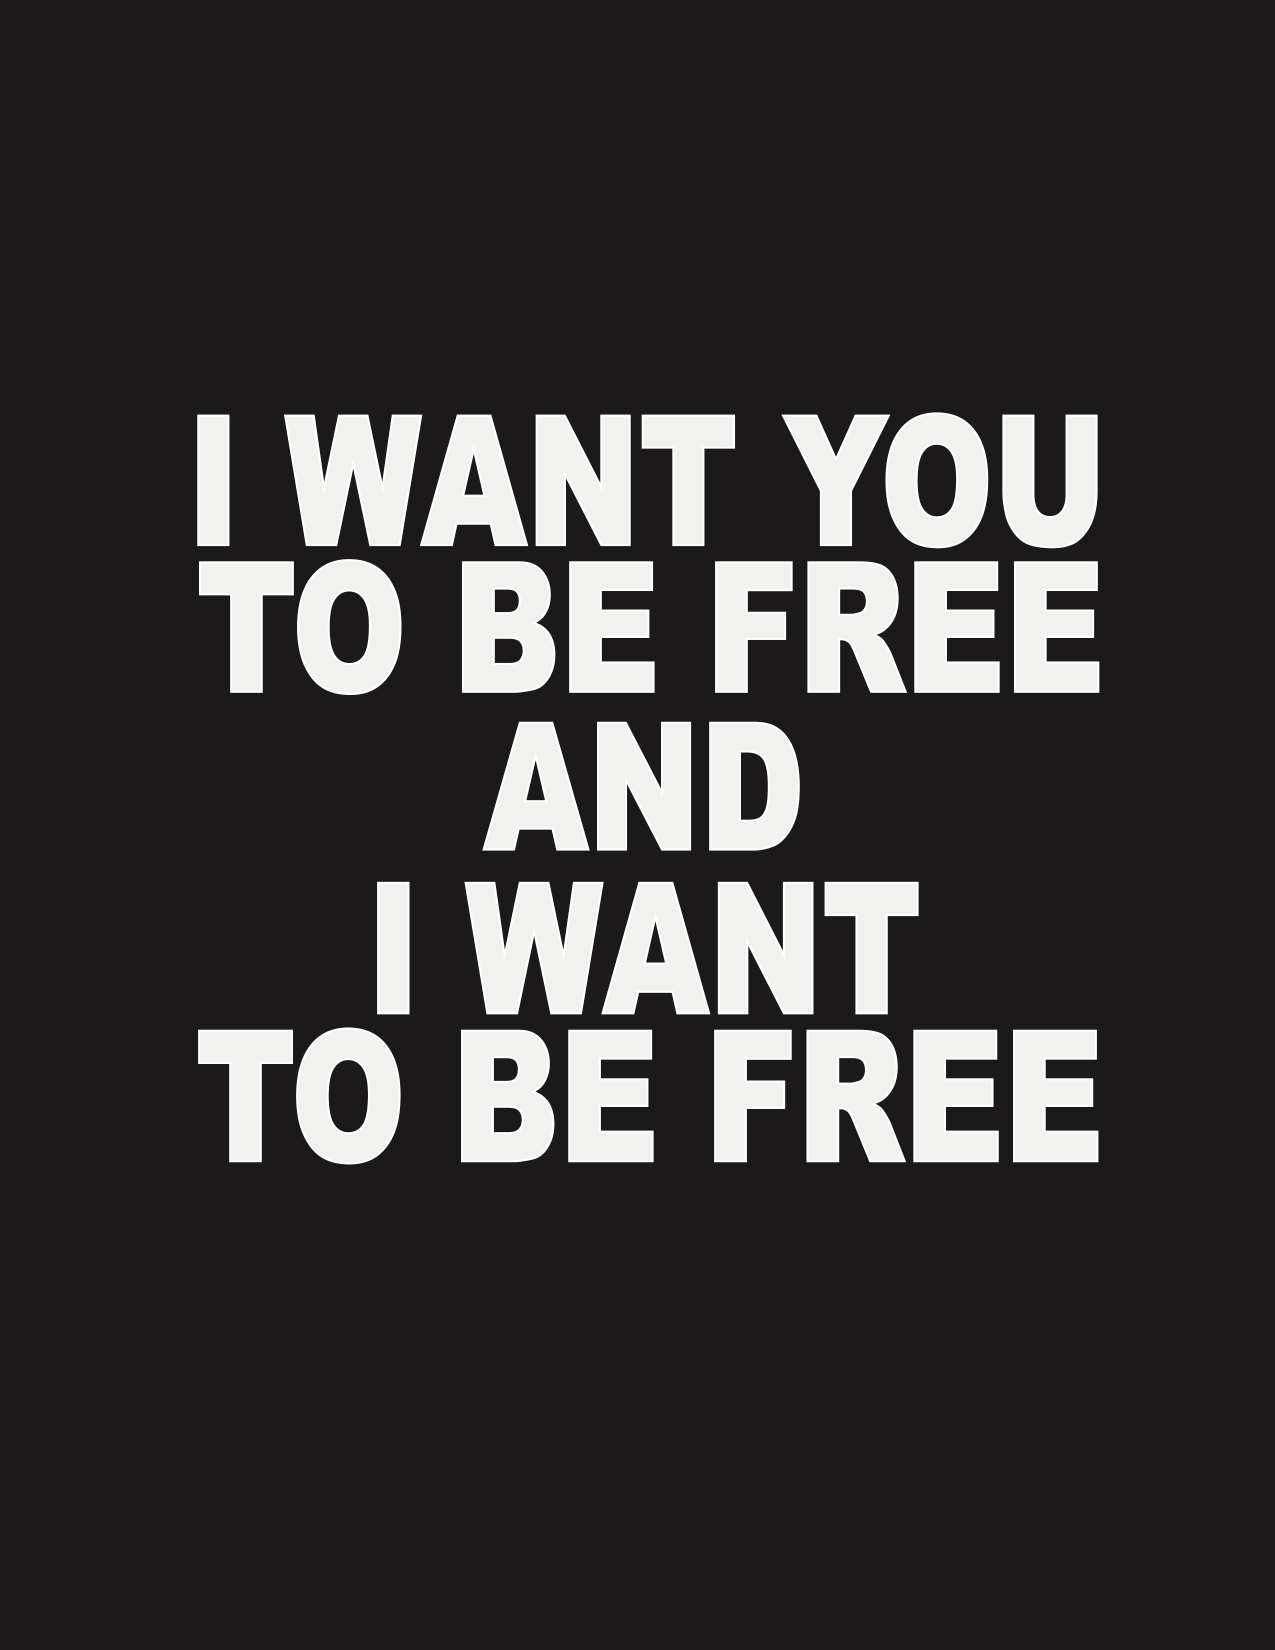 I WANT YOU TO BE FREE AND I WANT TO BE FREE